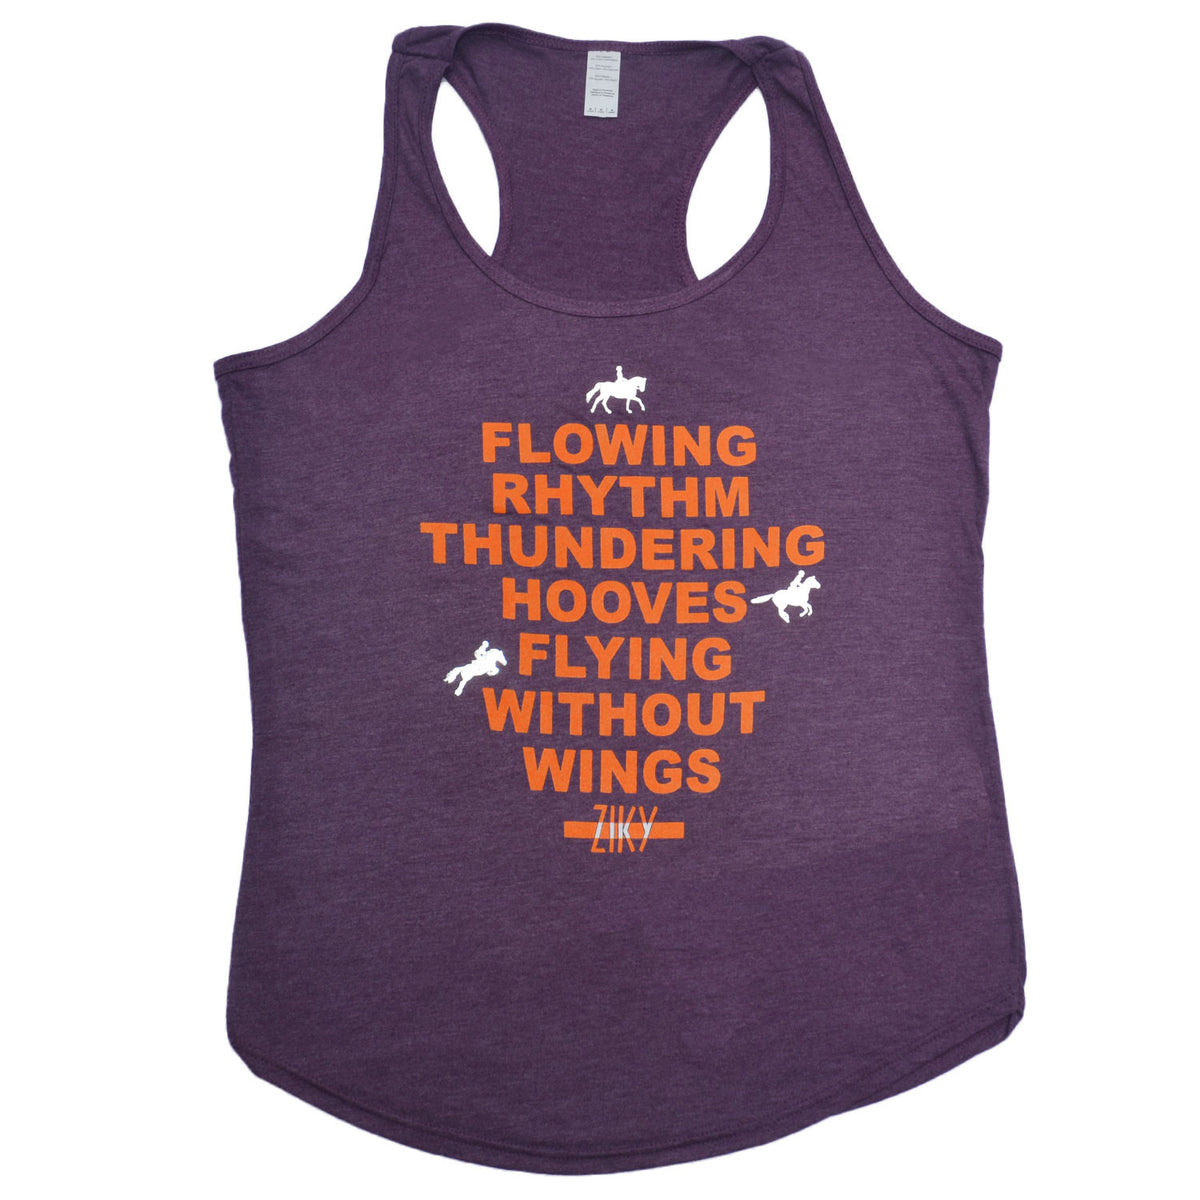 Horse eventing tank top